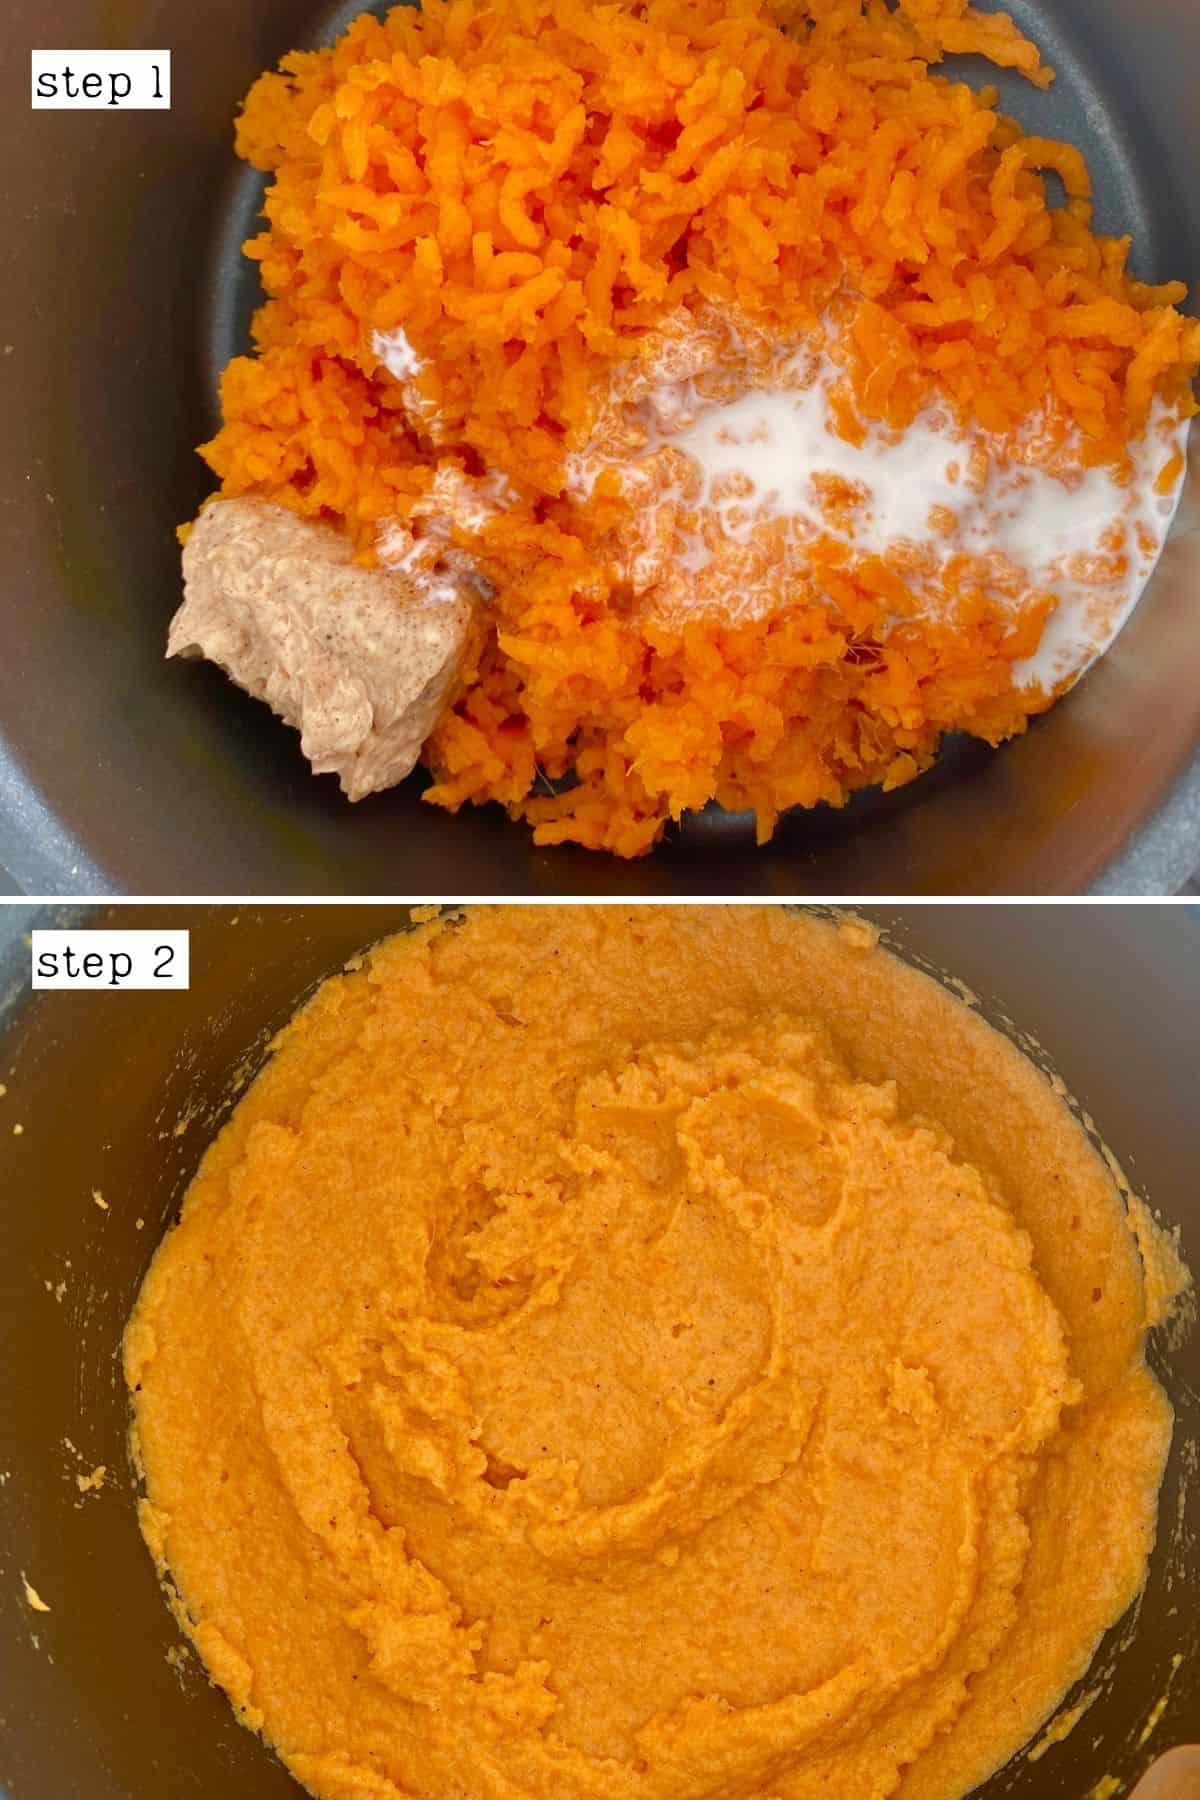 Steps for making mashed sweet potatoes